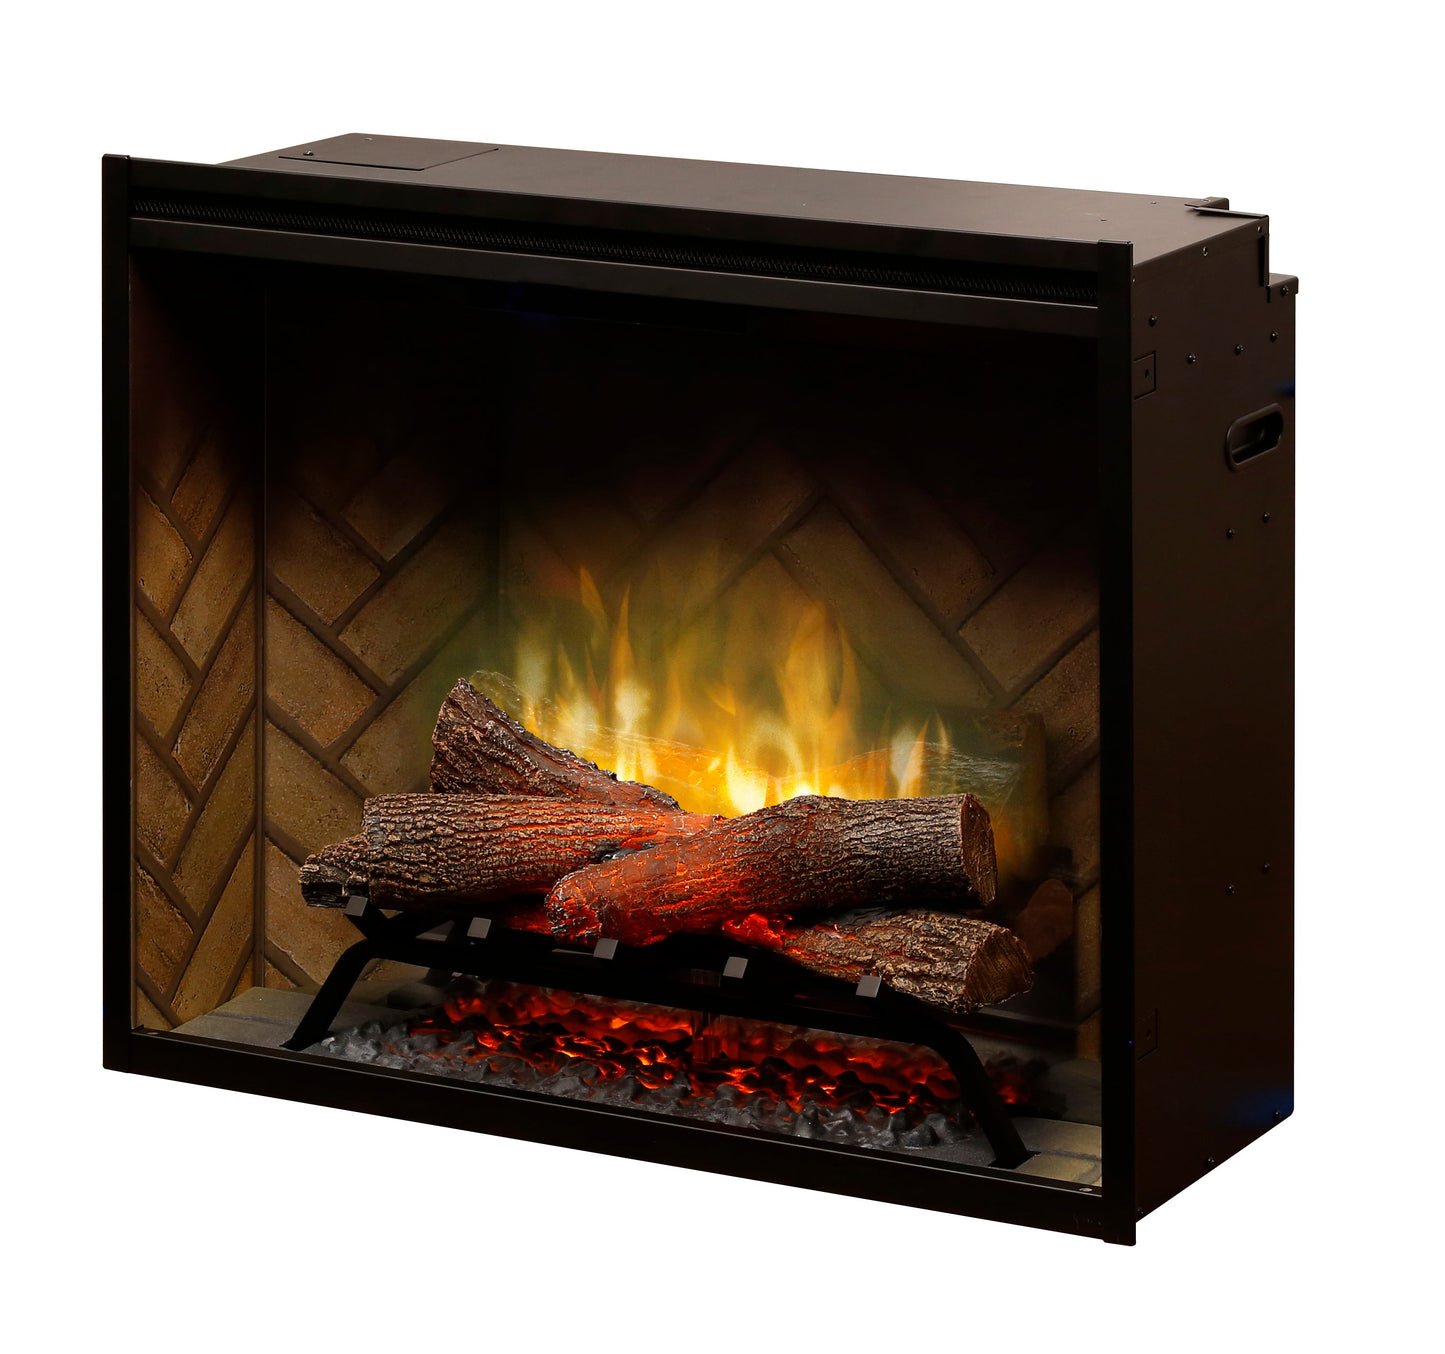 Dimplex Revillusion 30" Built In Electric Firebox (RBF30) - Electric Fireplace Shop